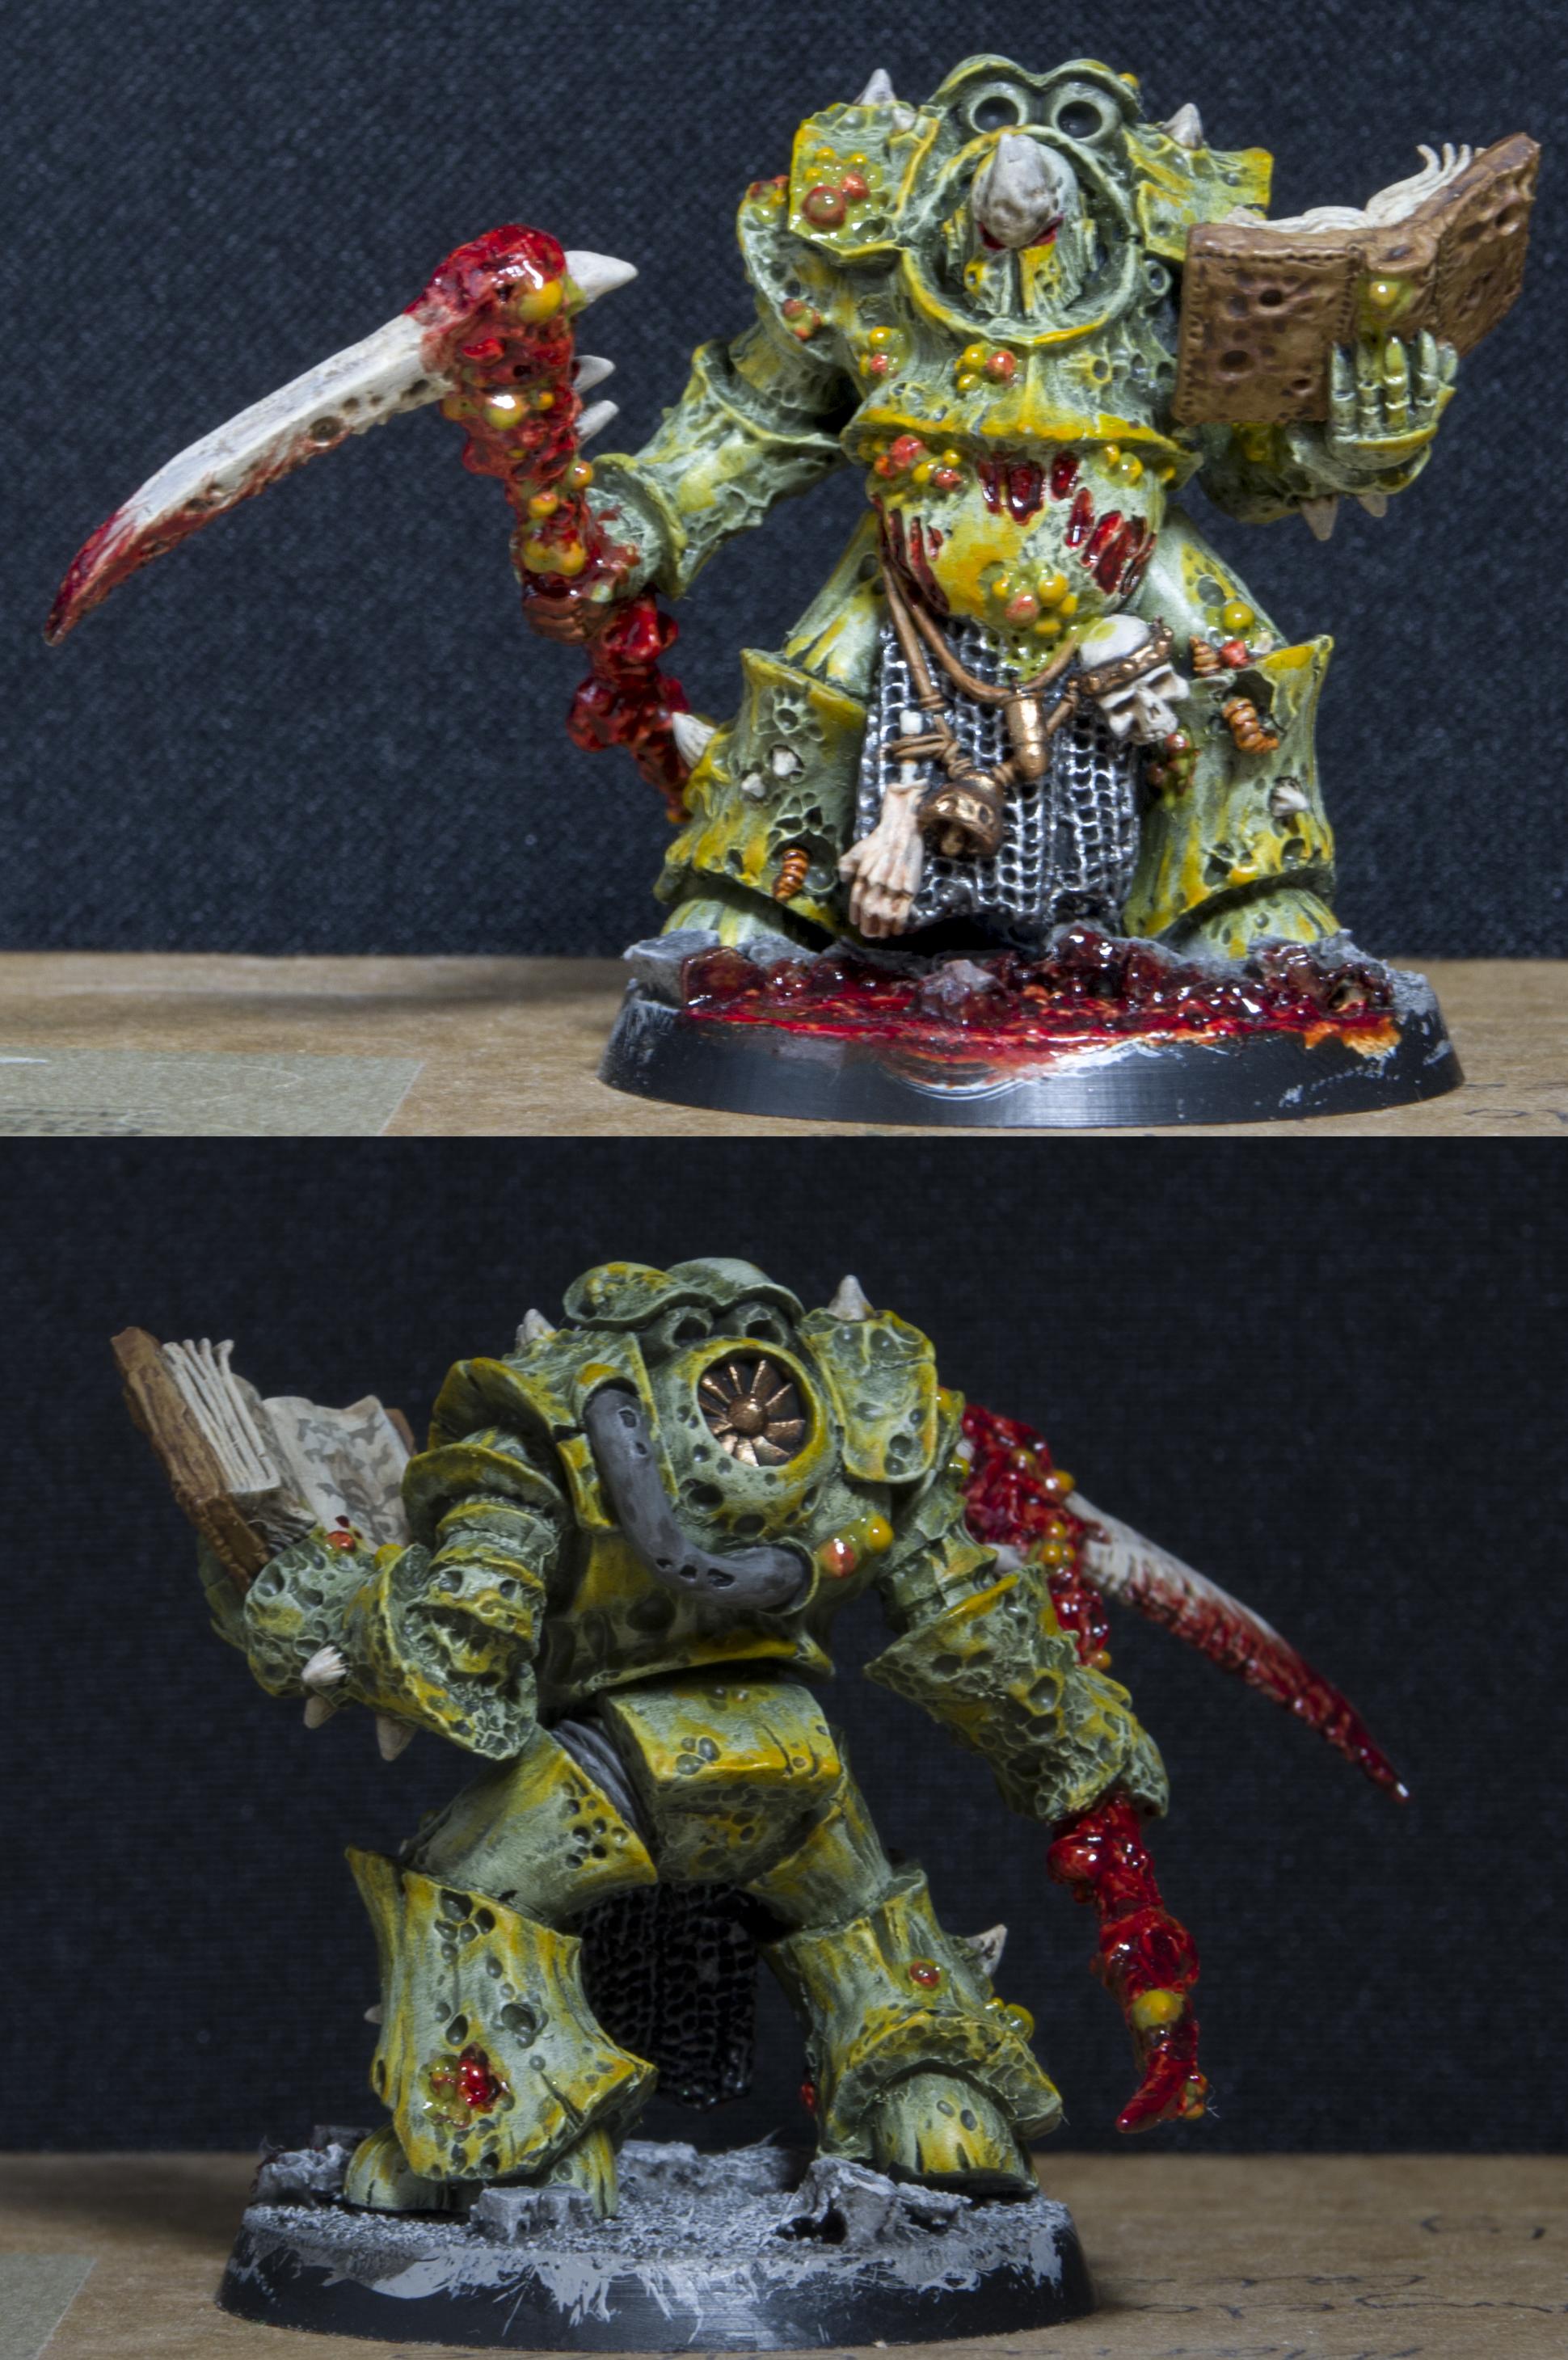 Champion, Chaos, Chaos Space Marines, Daemons, Forge World, Nurgle, Plague, Prince, Space, Space Marines, Terminator Armor, Typhon, Typhus, Warhammer 40,000, Warhammer Fantasy, Wh40